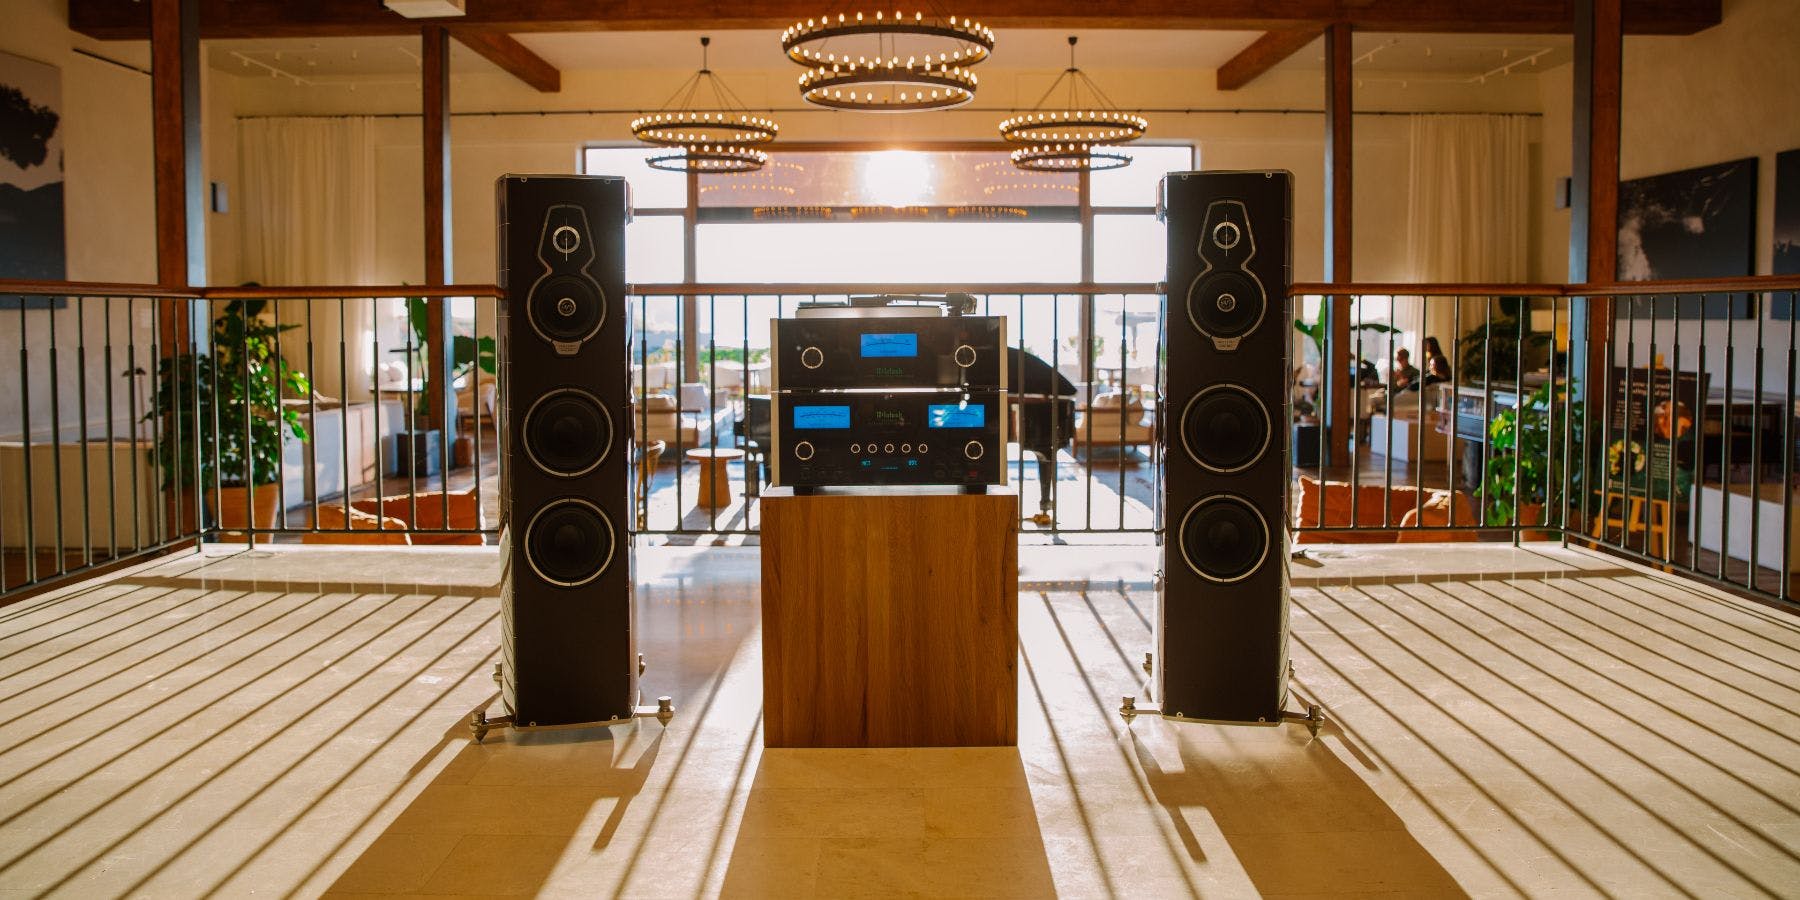 Ibiza to sound better than ever as McIntosh, Sonus faber and Six Senses Ibiza debuts exclusive Live Cave music experiences